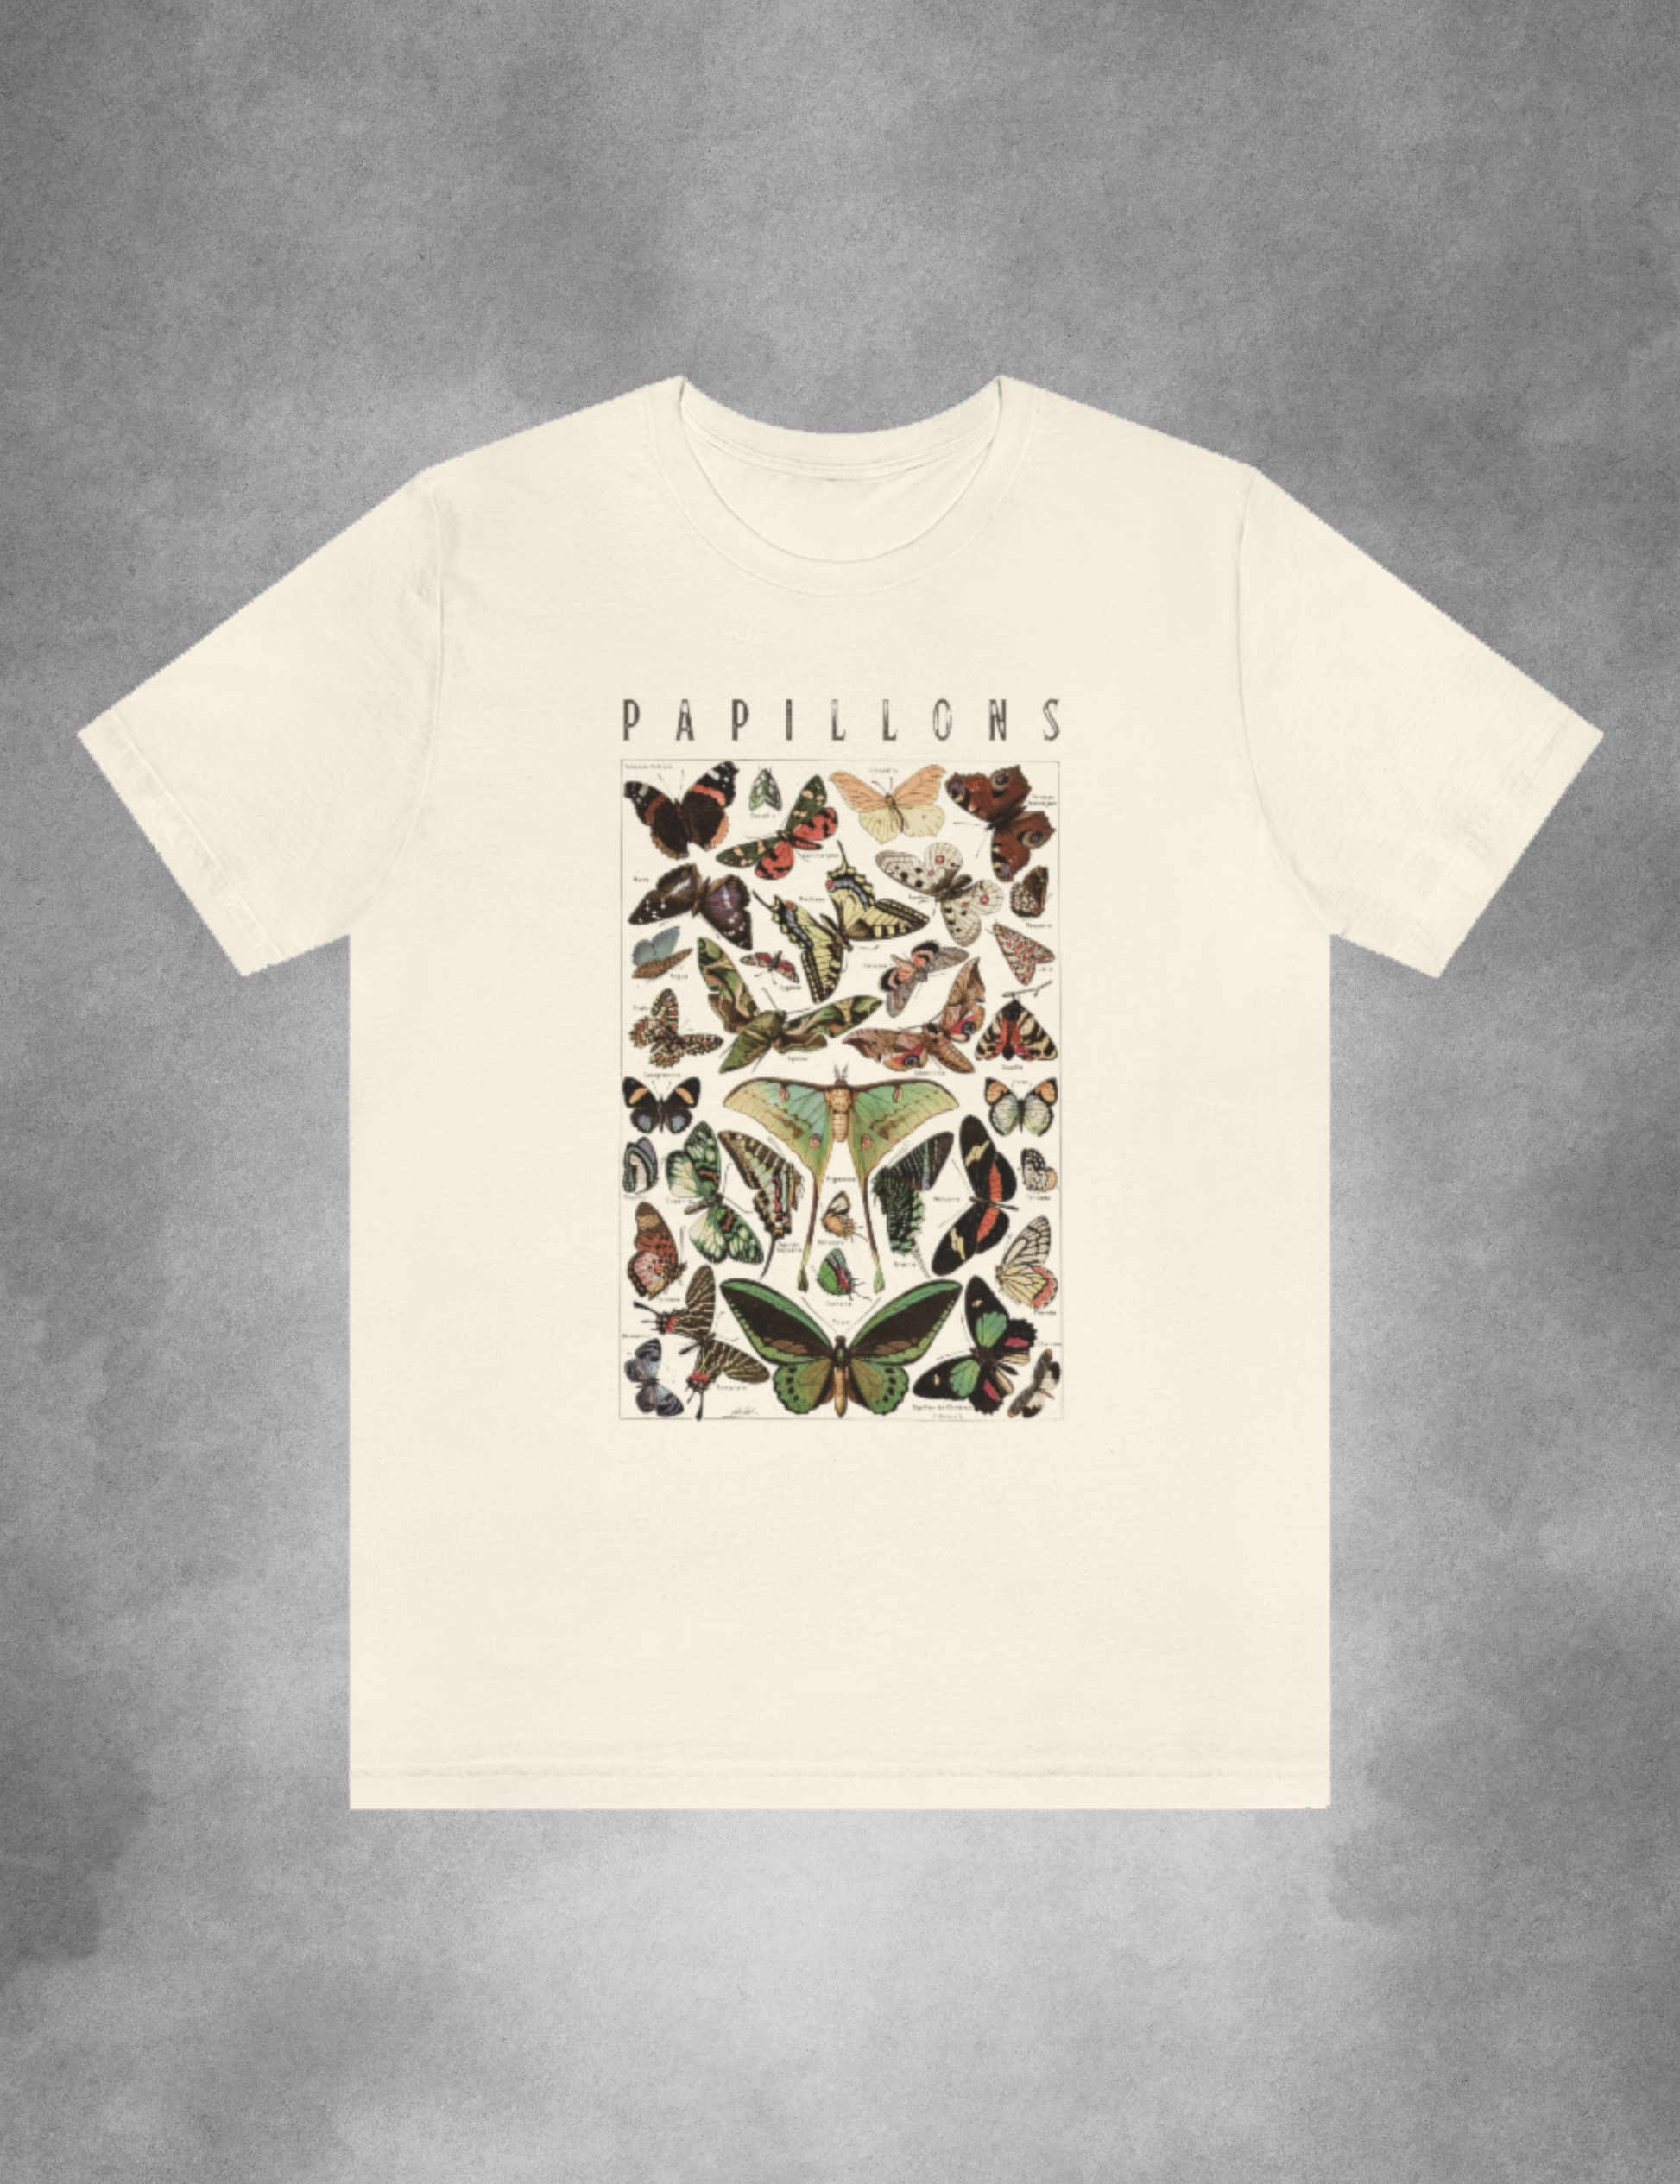 Grunge Fairycore Aesthetic Outfits Butterfly Shirt